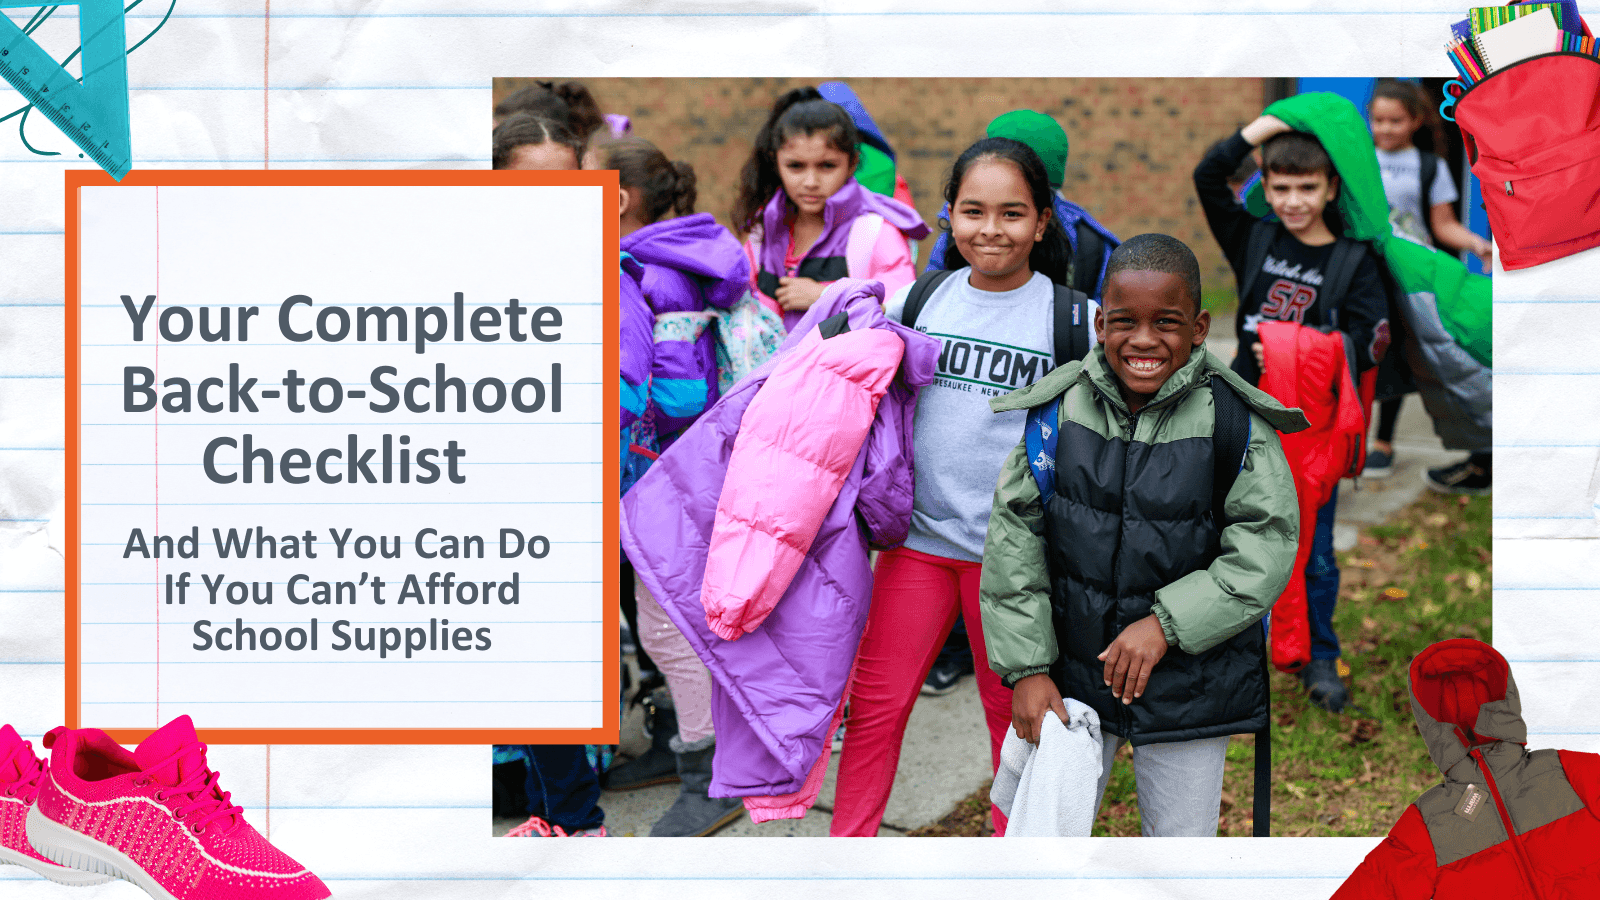 Your Complete Back-to-School Checklist (And What You Can Do If You Can’t Afford School Supplies)